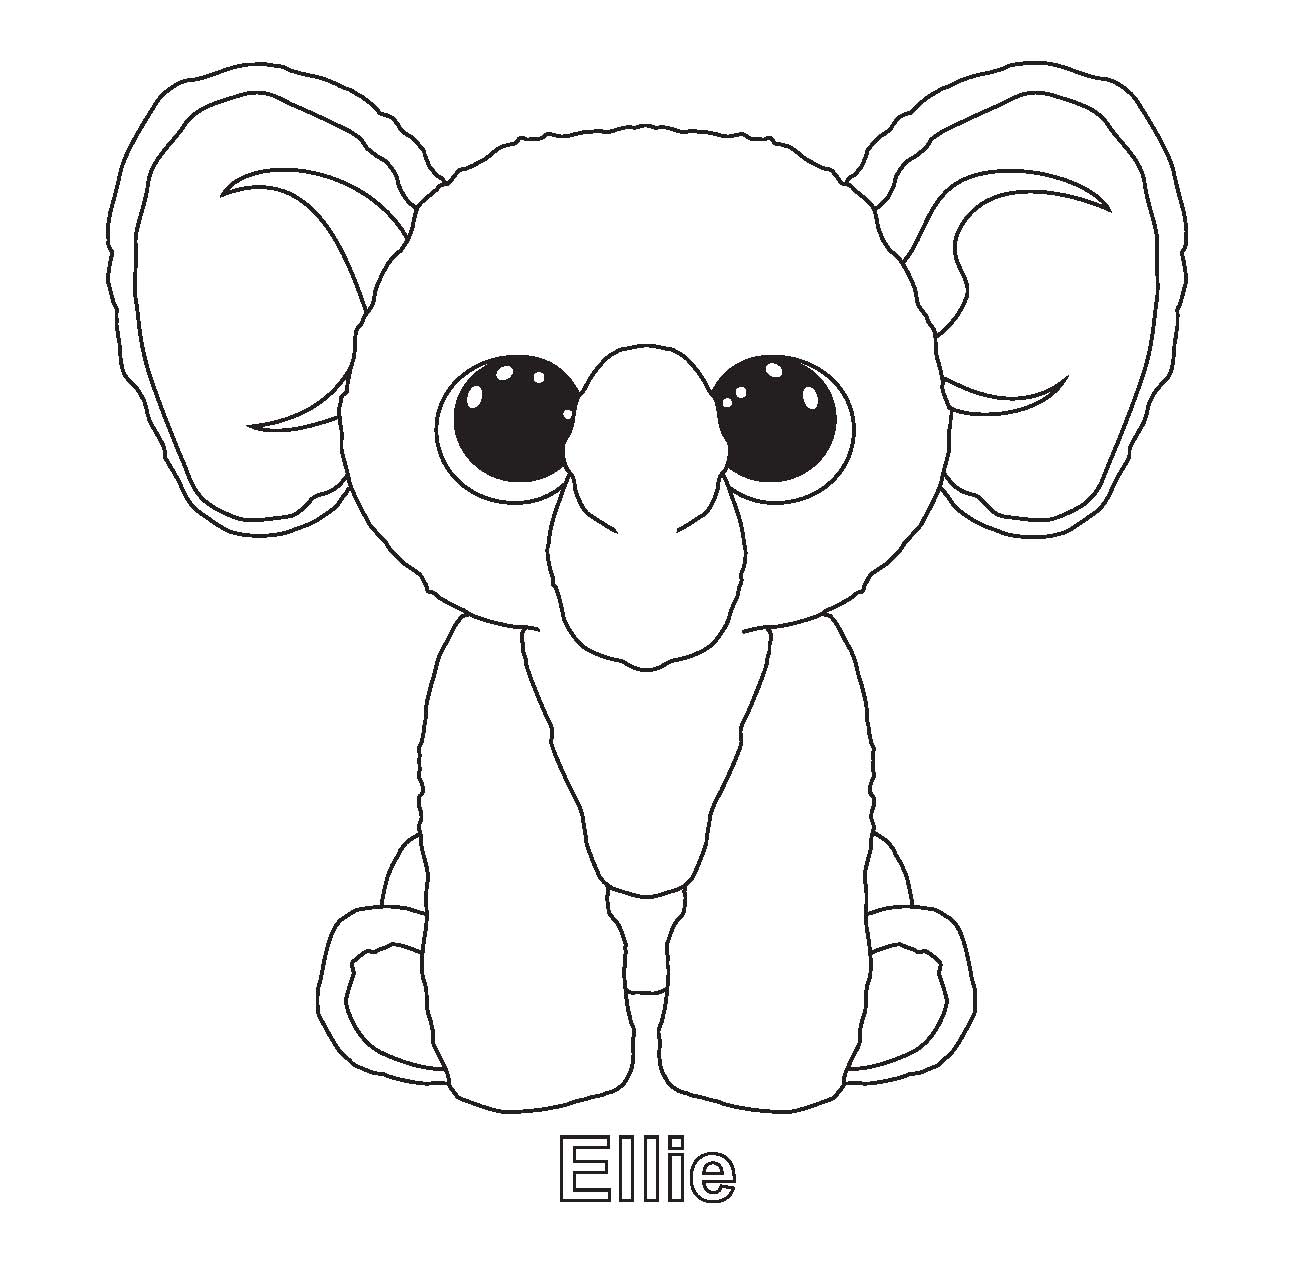 New Ellie Beanie Boo Coloring Pages   Coloring Cool